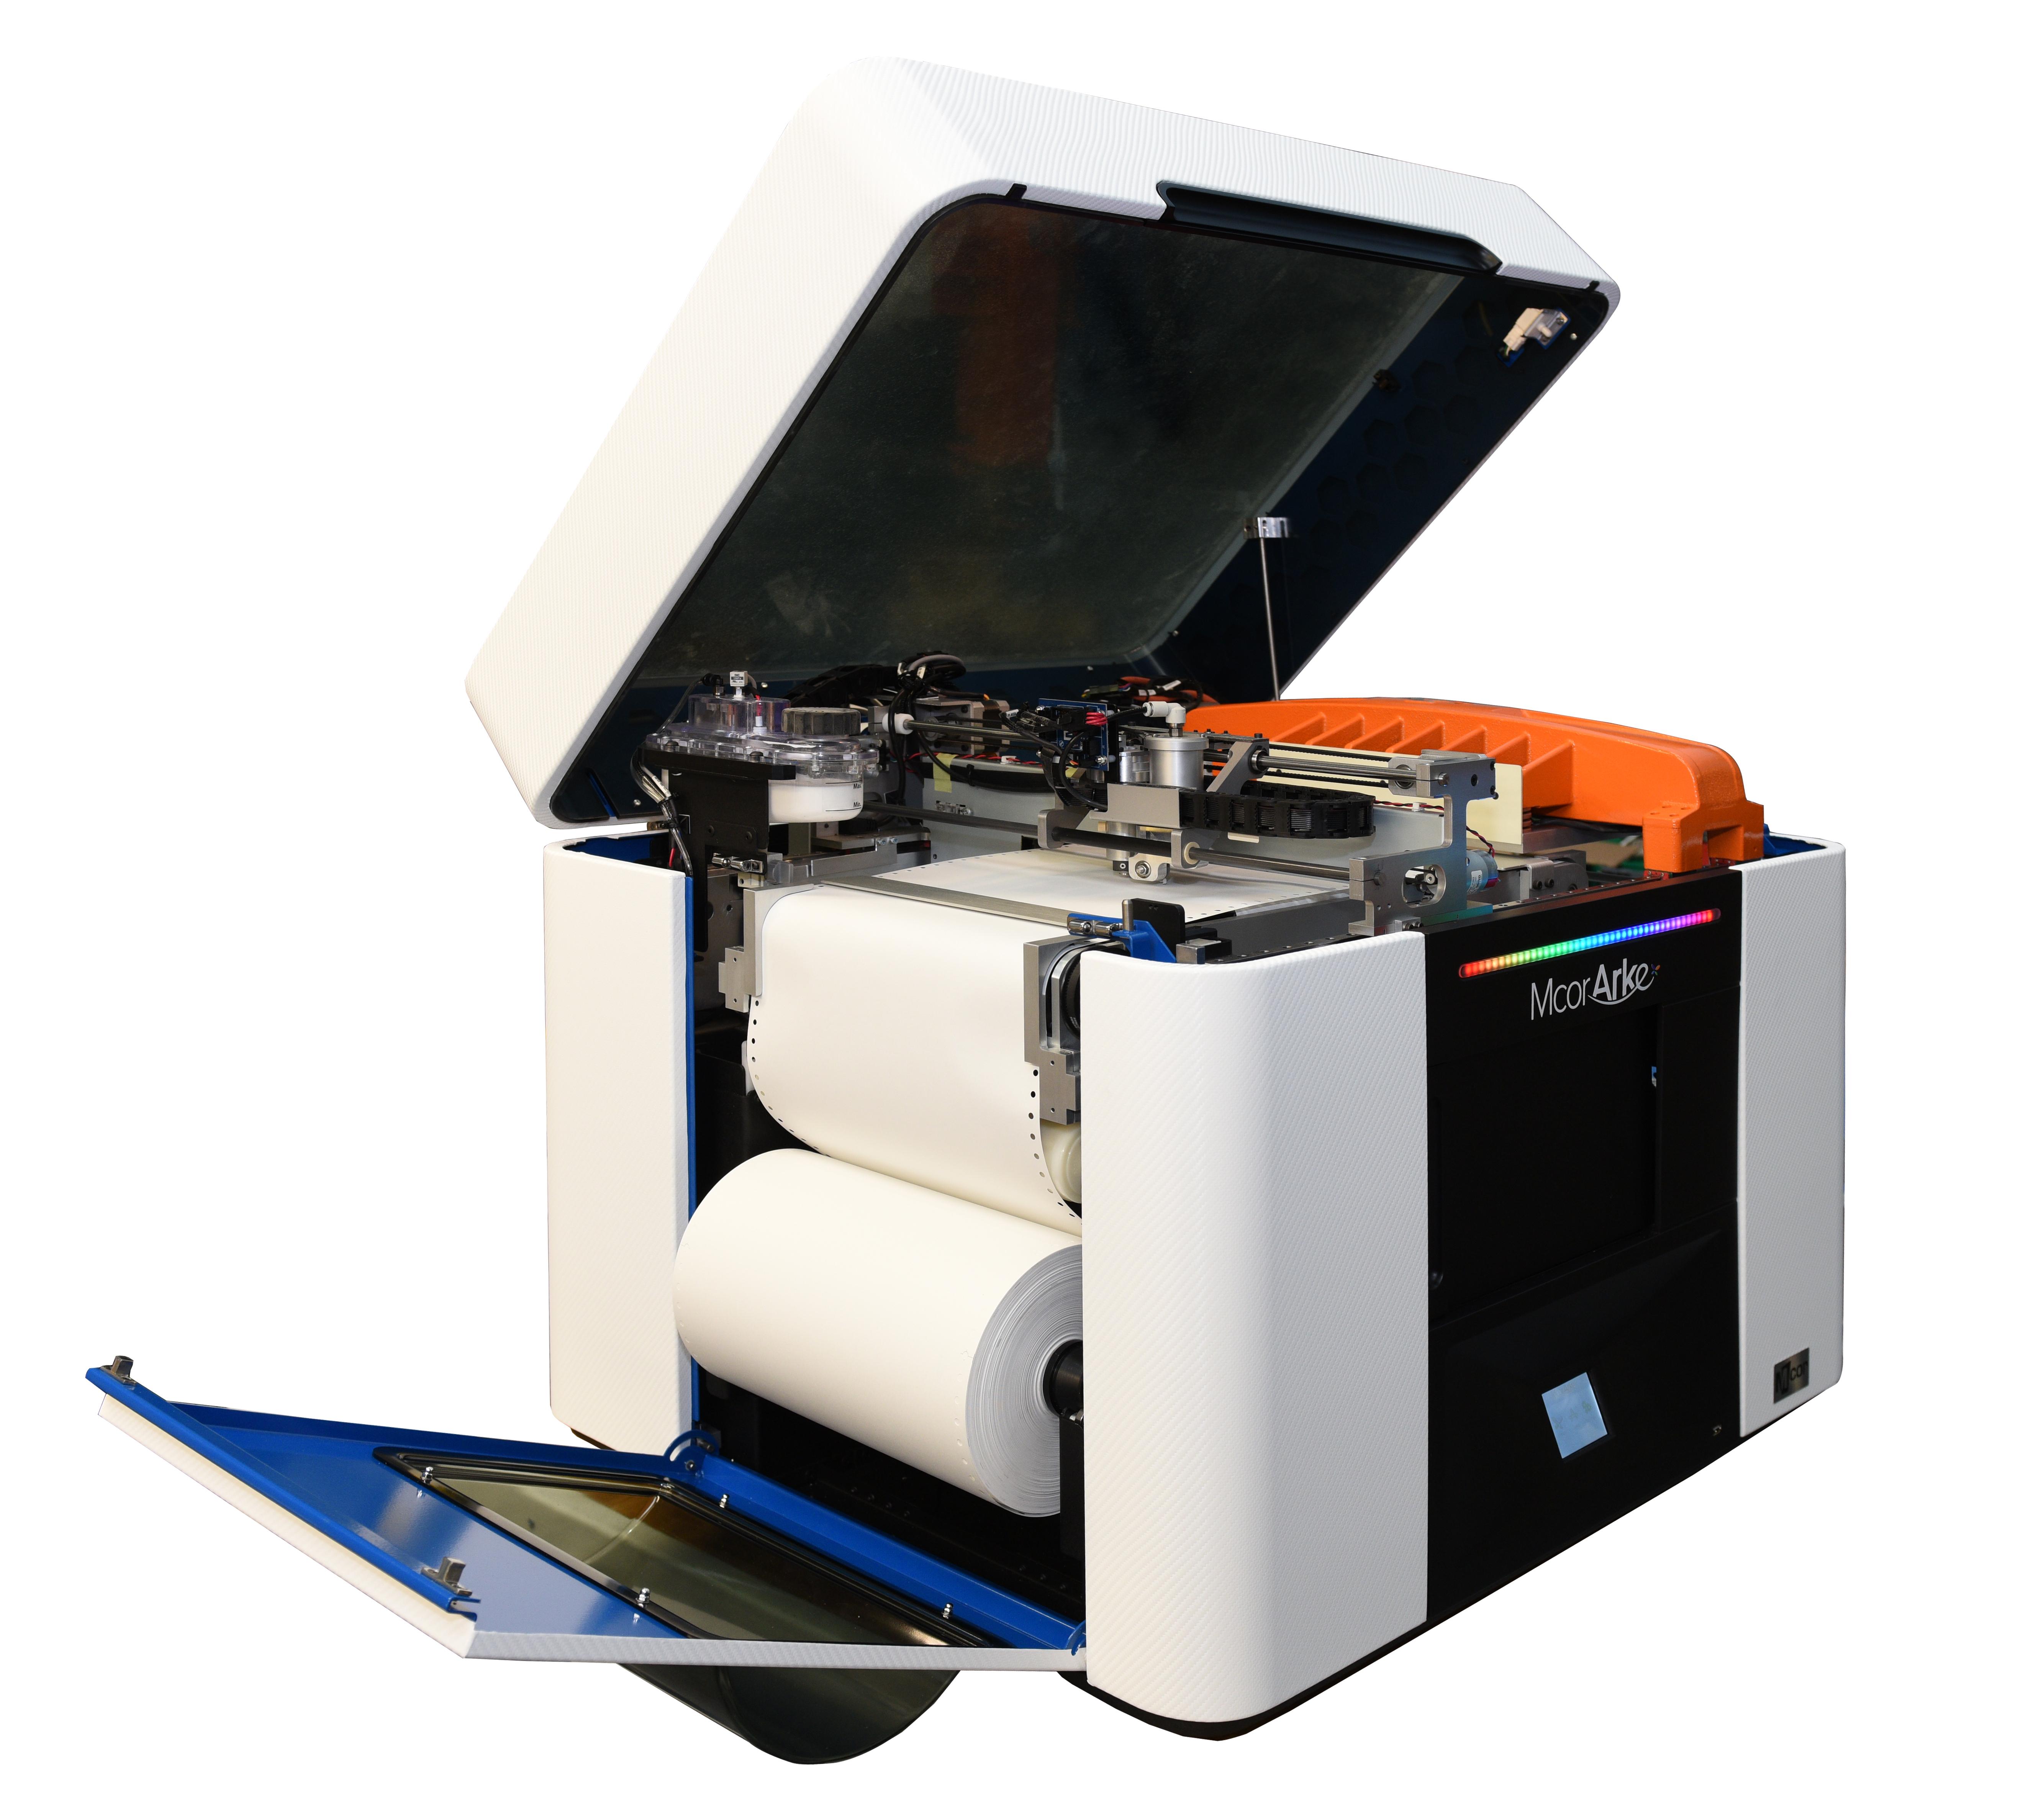 Mcor Announces the Release of Their First Desktop 3D Printer The Full